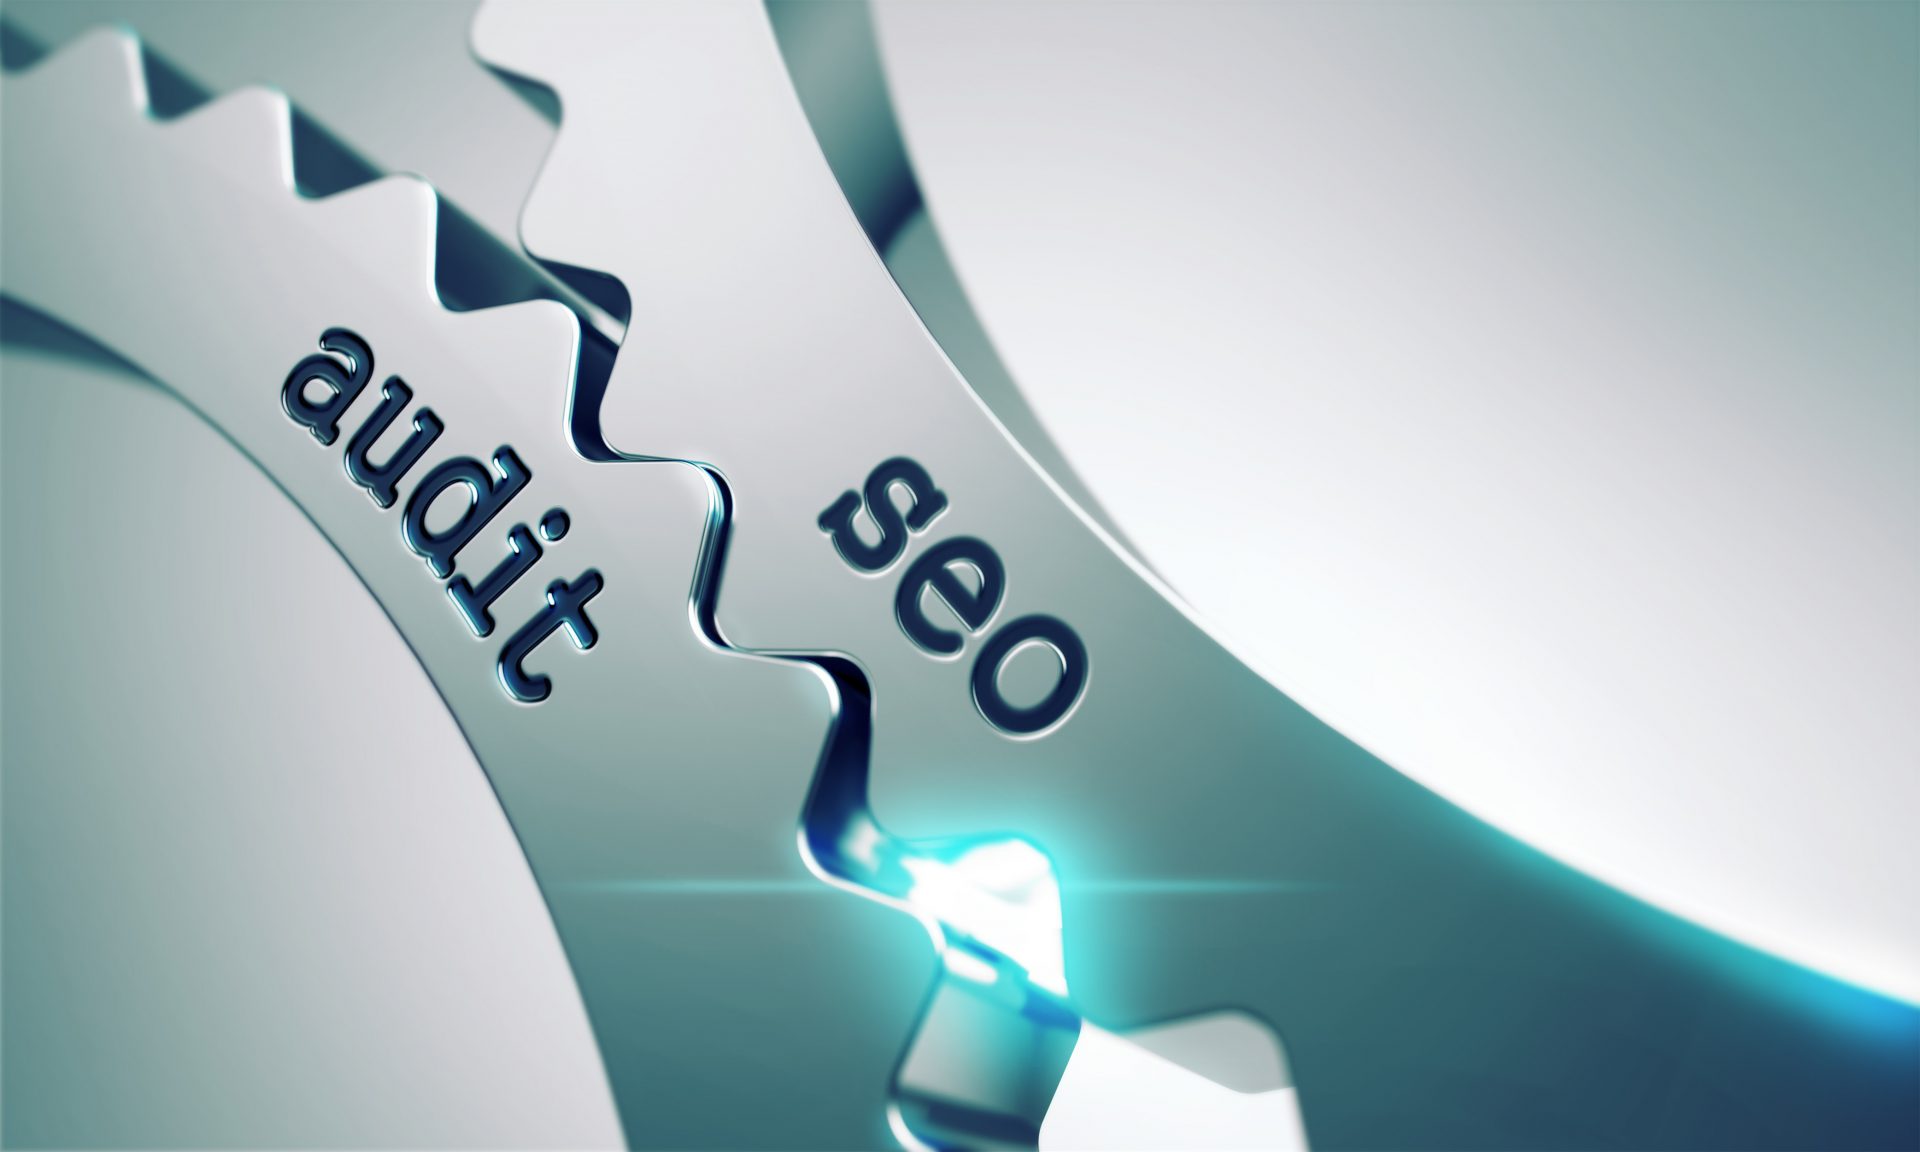 How To Increase Traffic, How to Perform an SEO Audit, gears with seo audit written on them